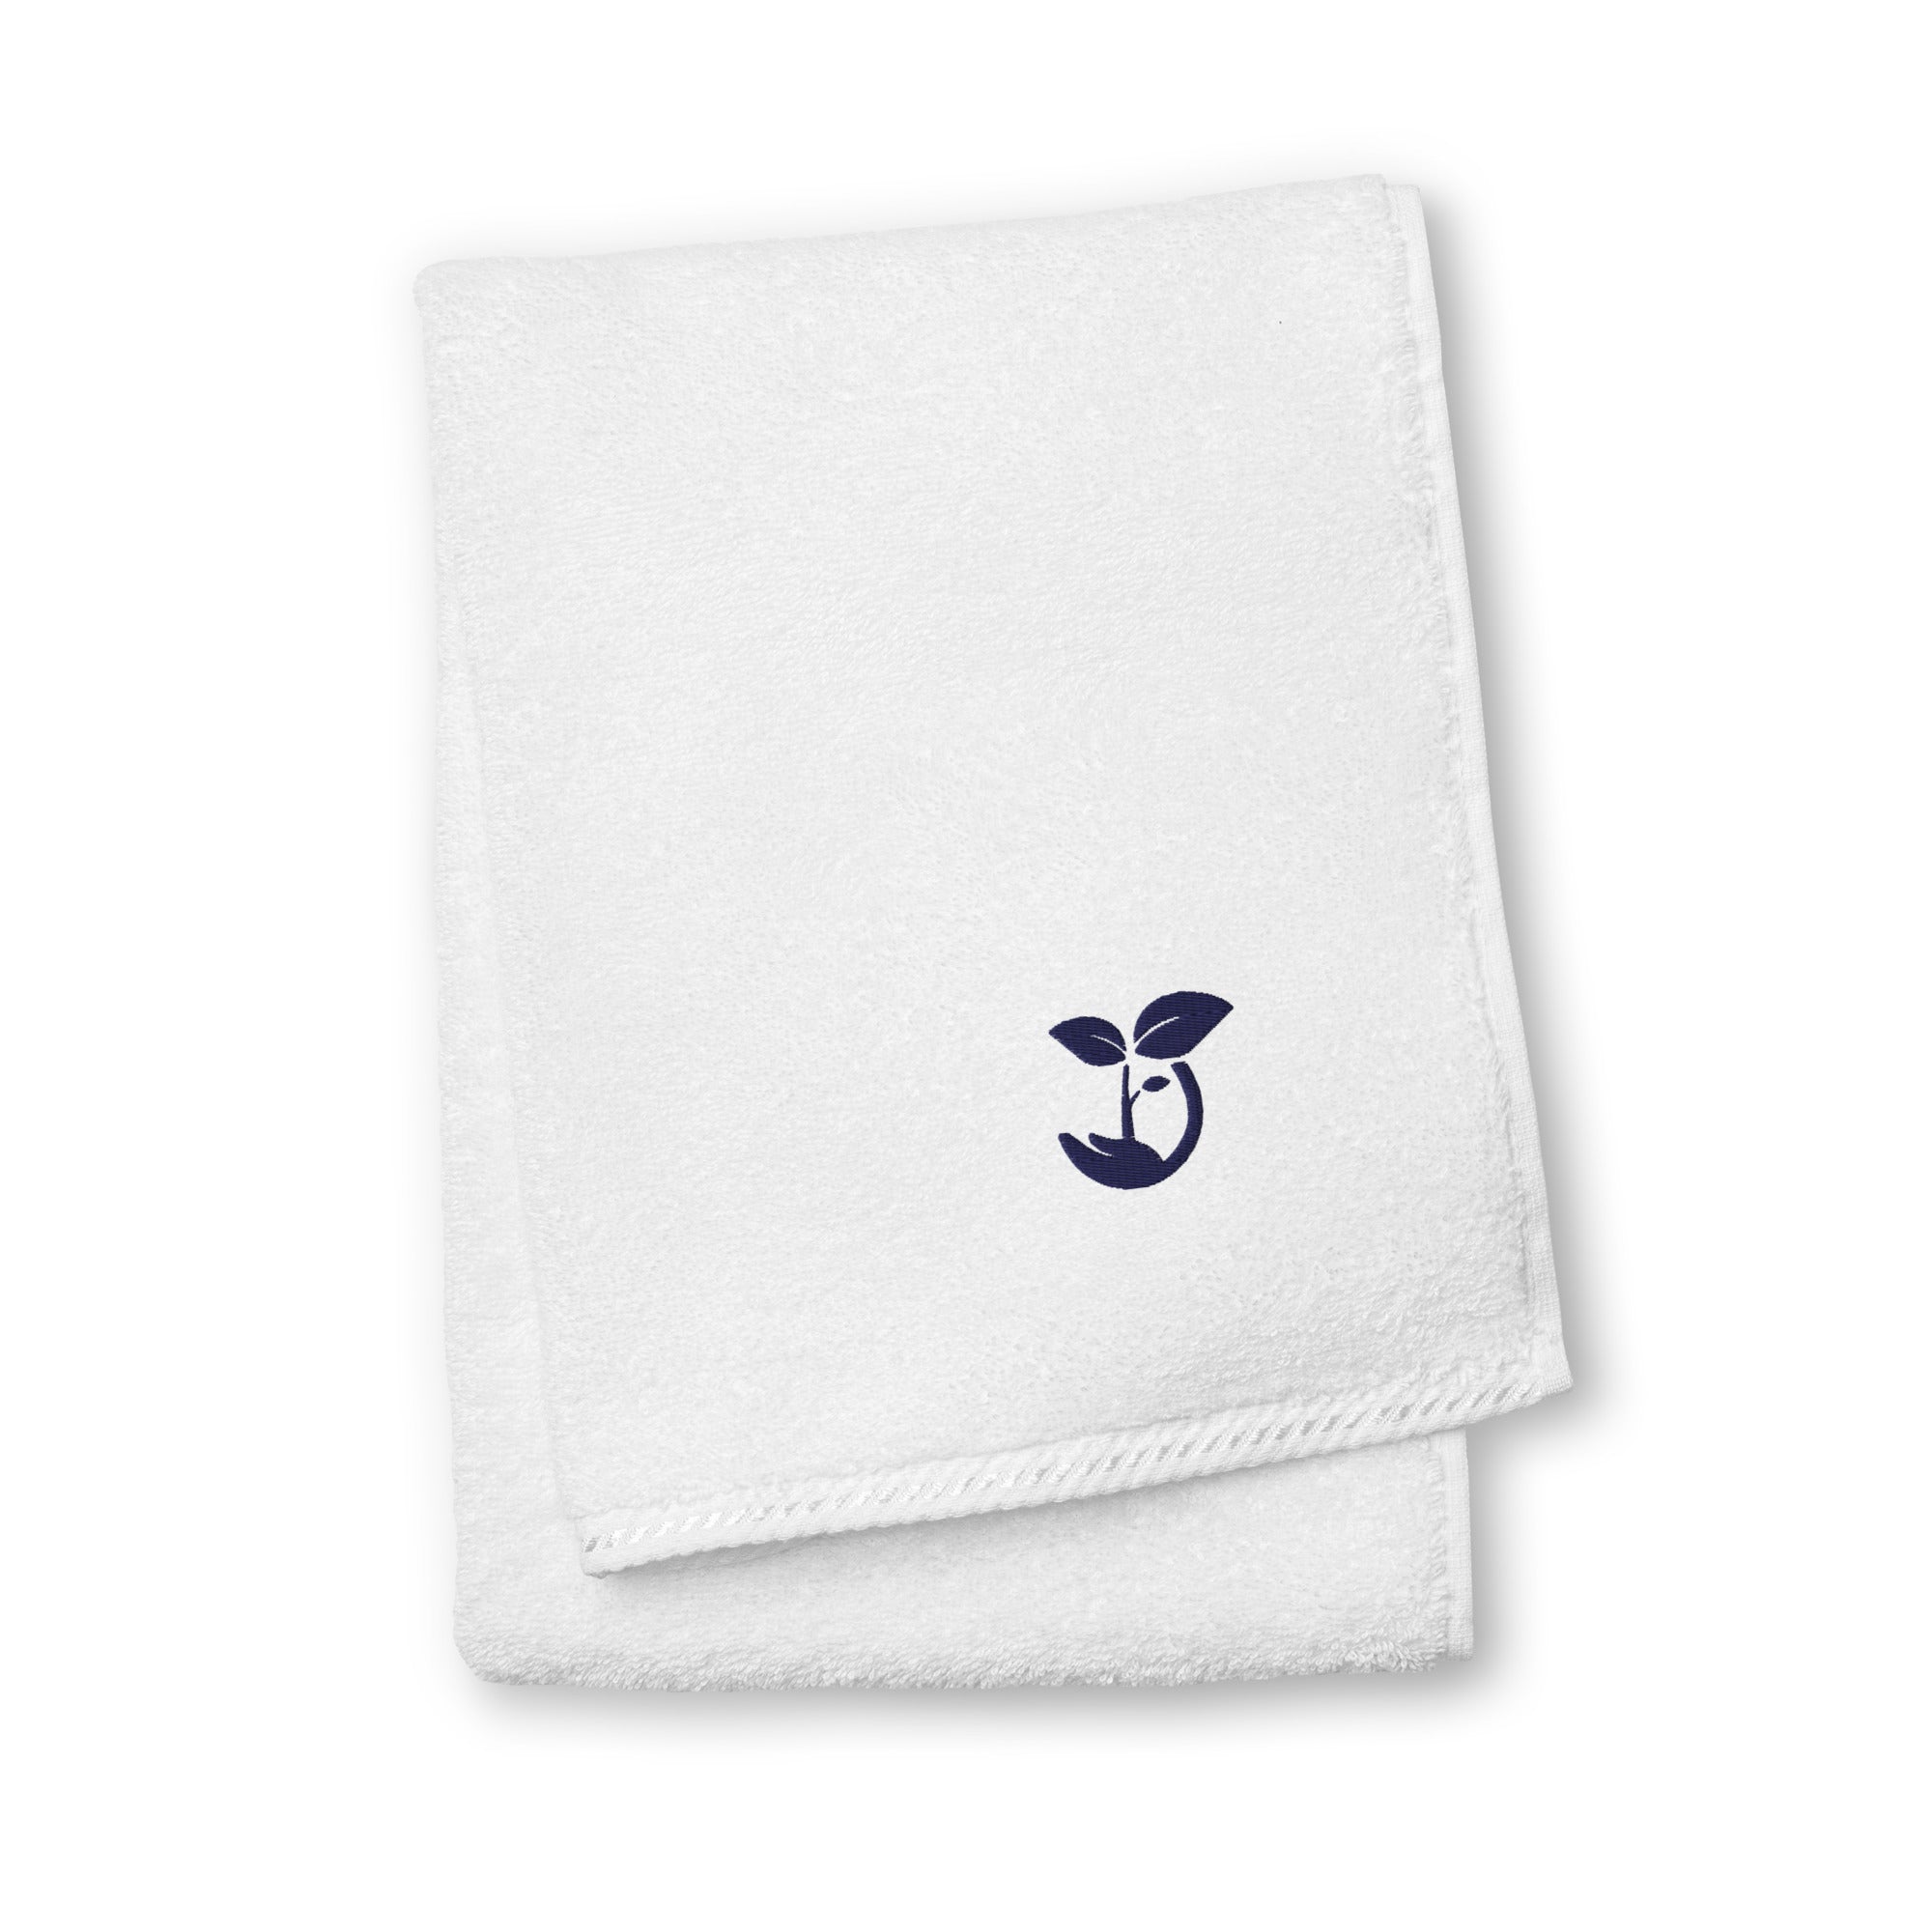 Brothers4Change cotton towel